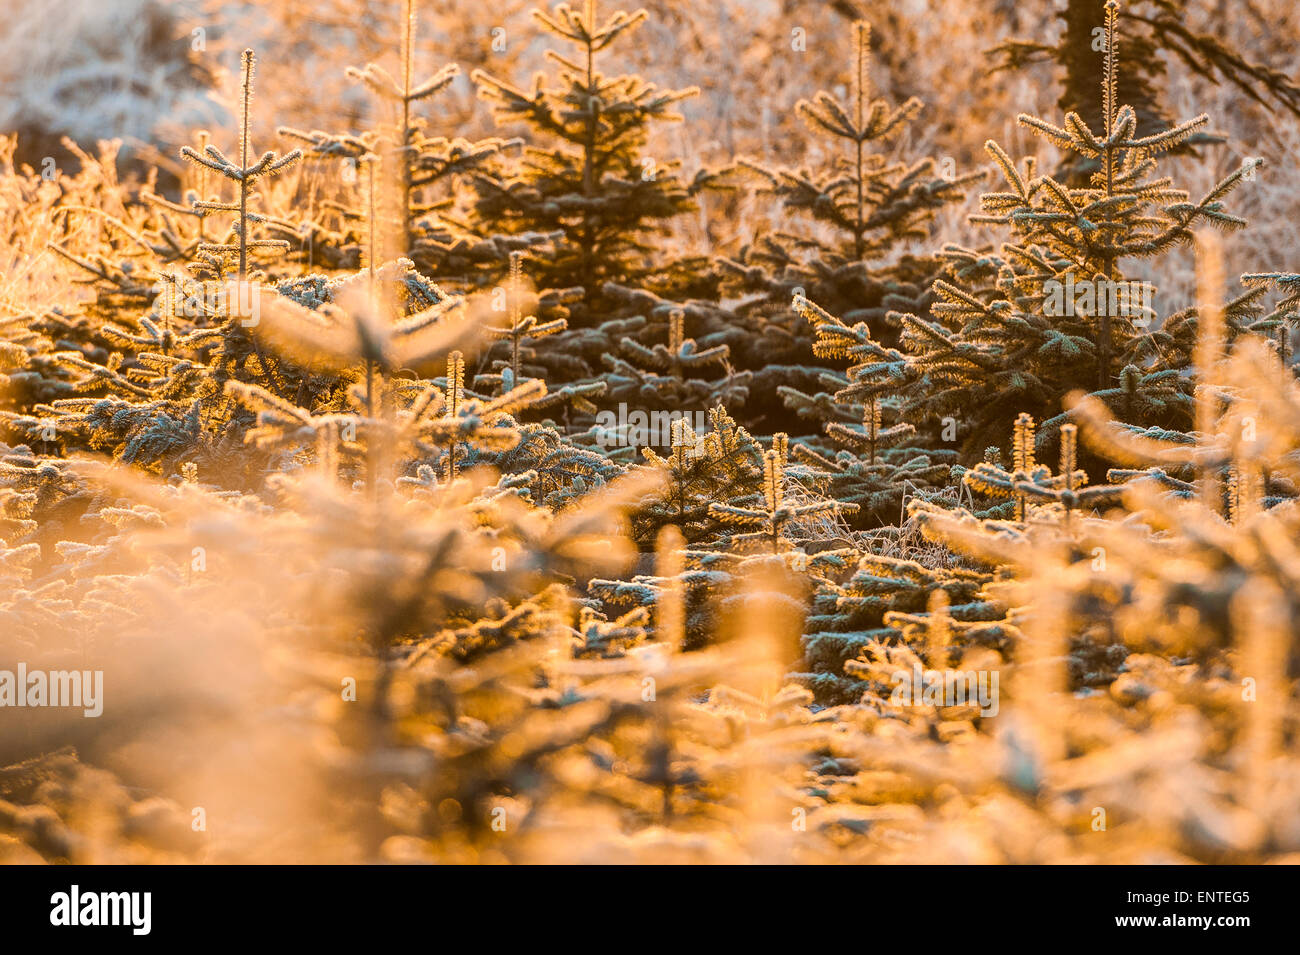 Frost covered Sitka spruce Christmas trees in Scotland in a winter scene Stock Photo